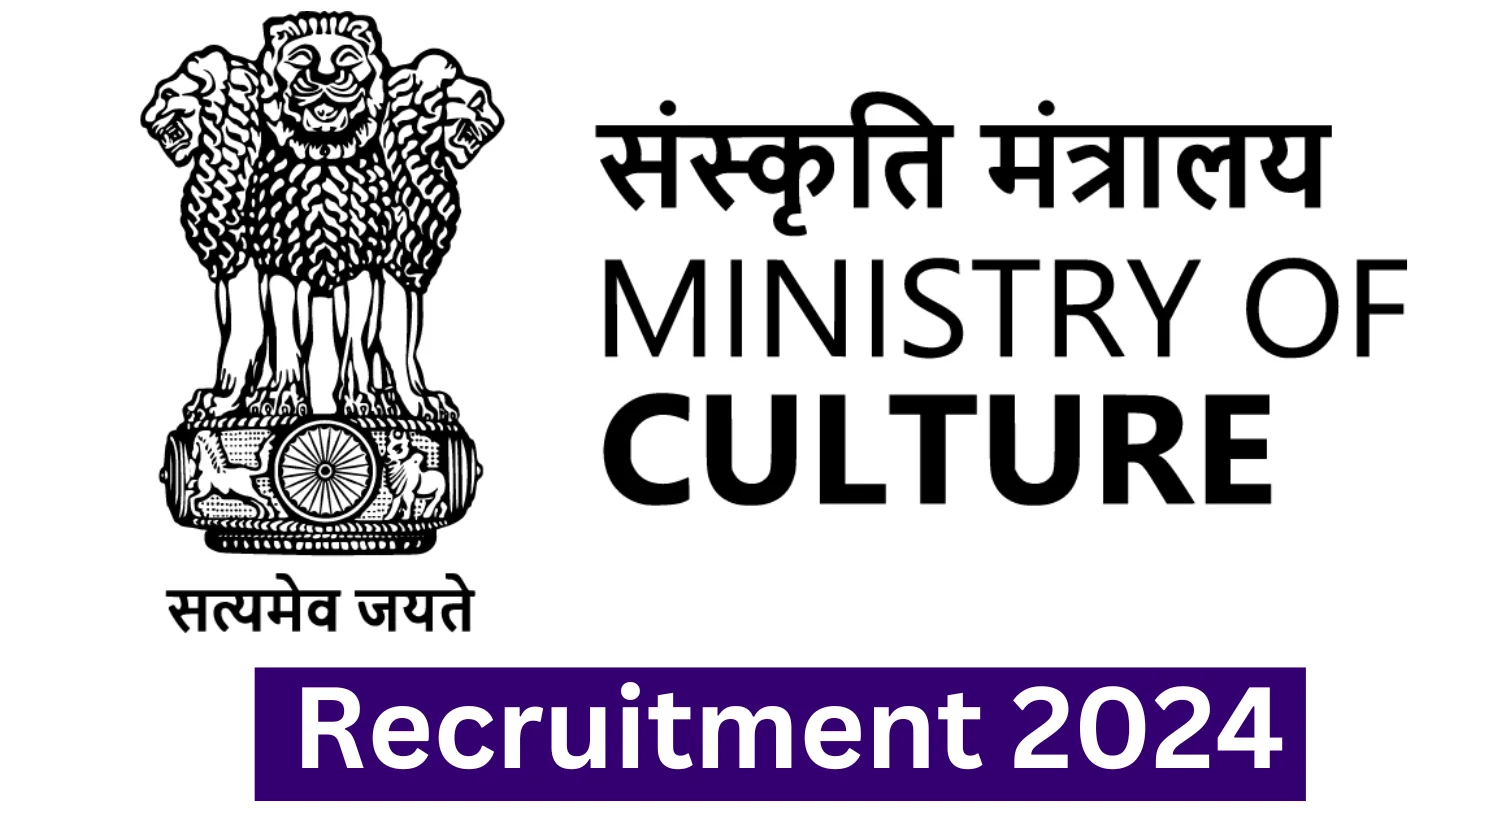 Ministry of Culture Recruitment 2024